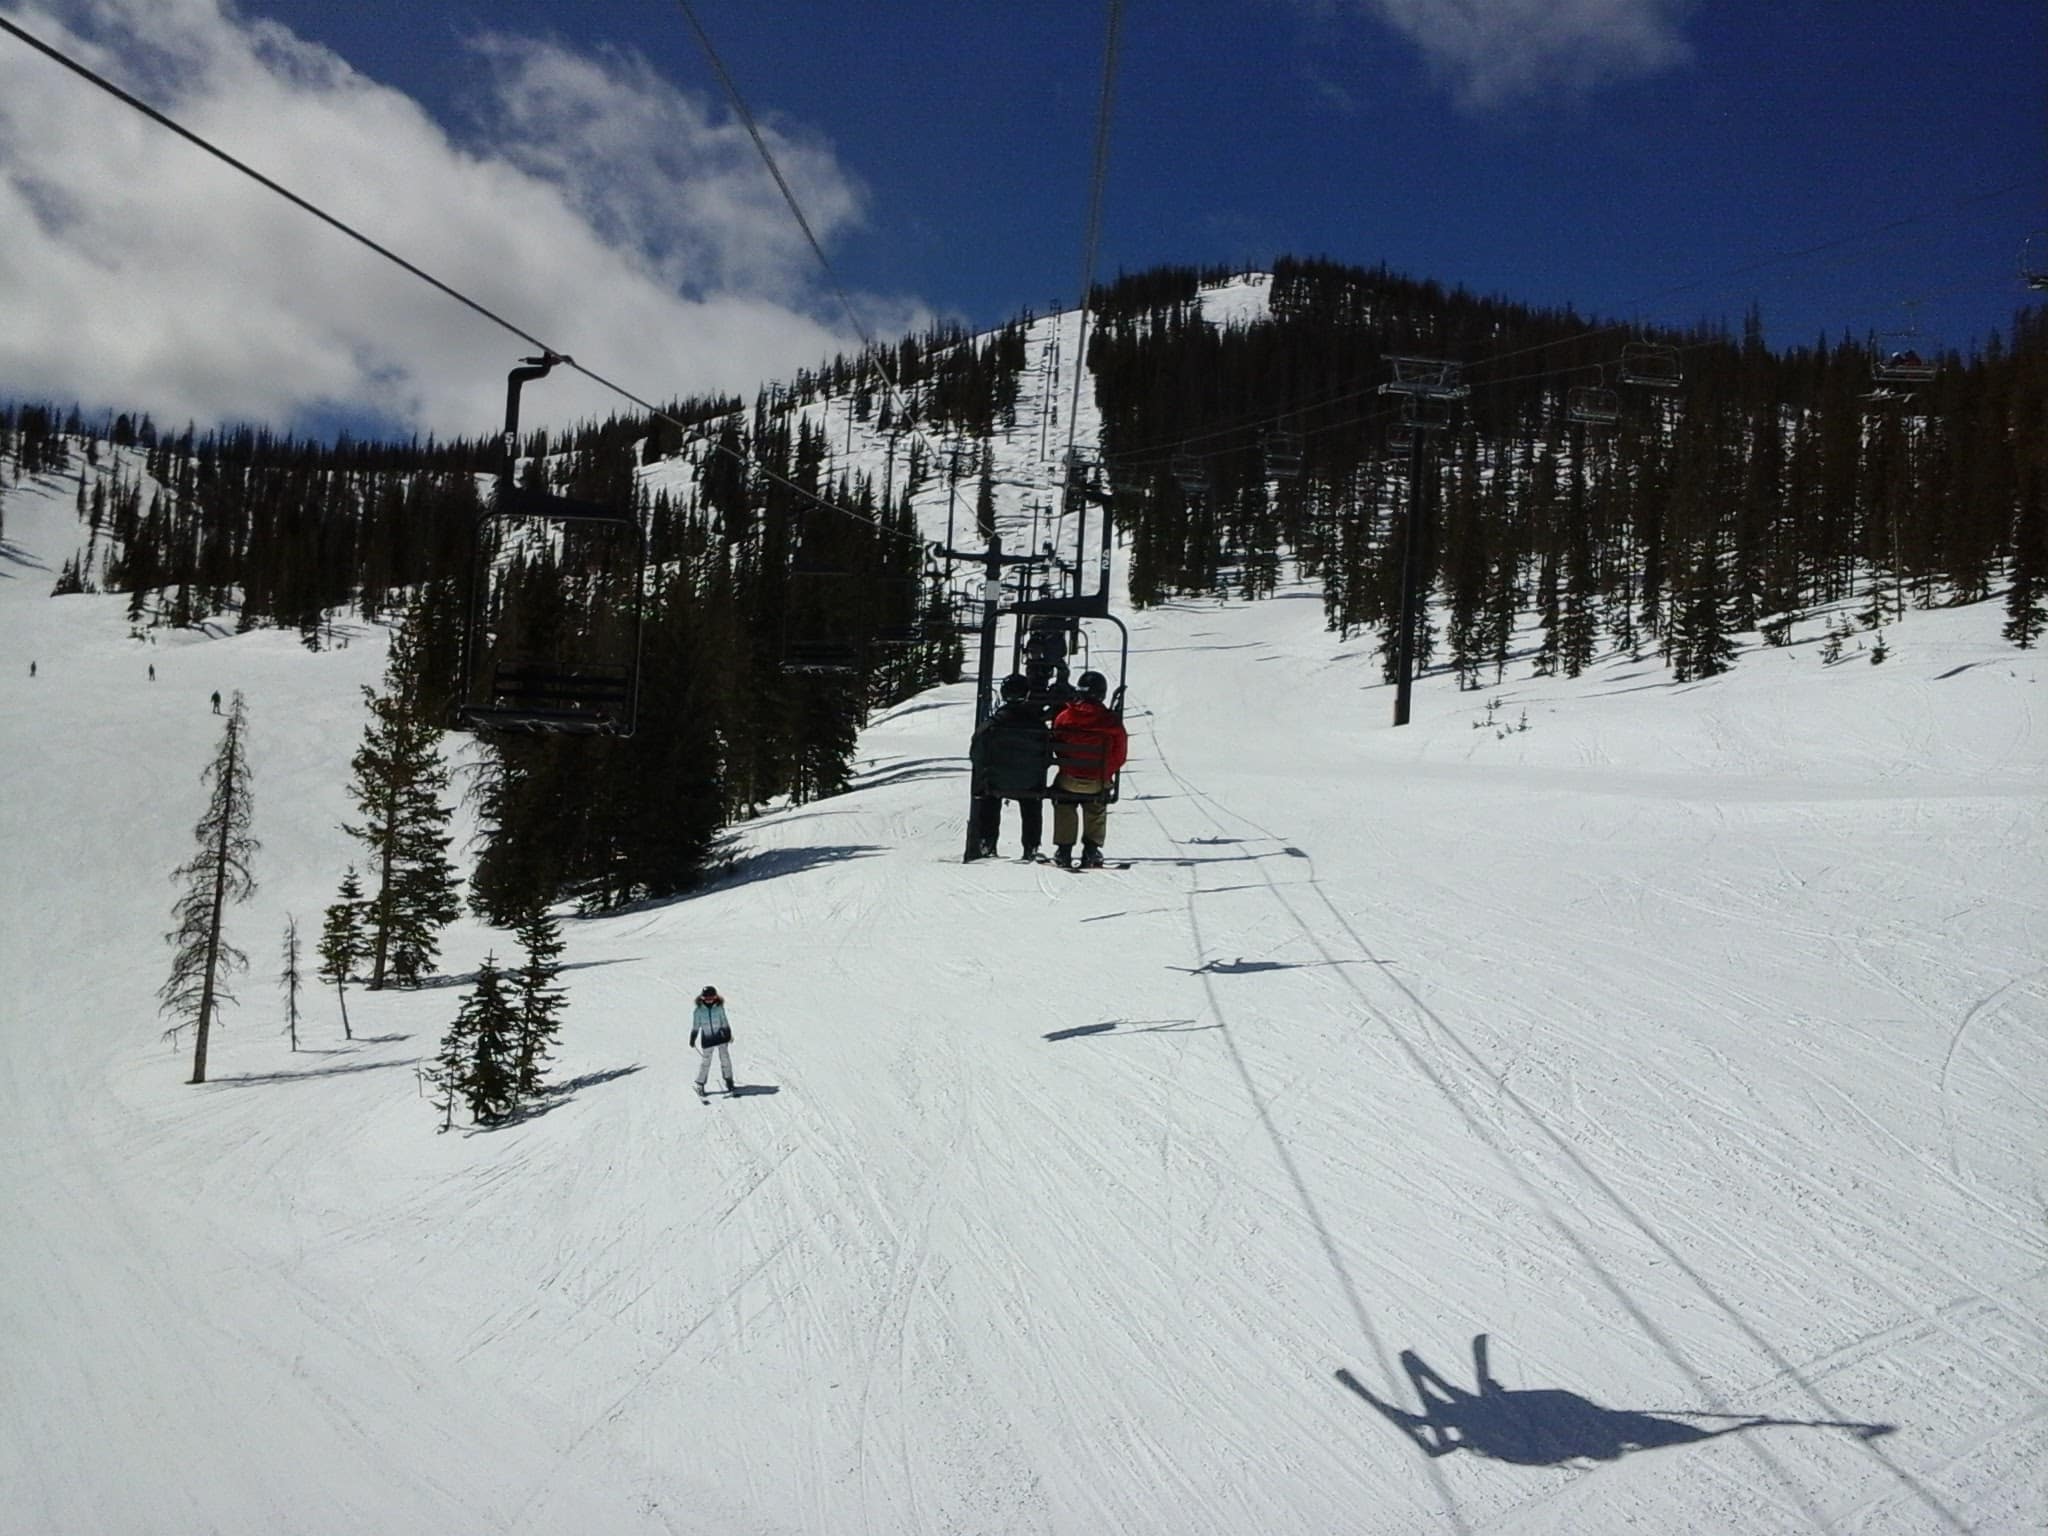 Exterior ski area with blue skys.  People riding on a chair lift.